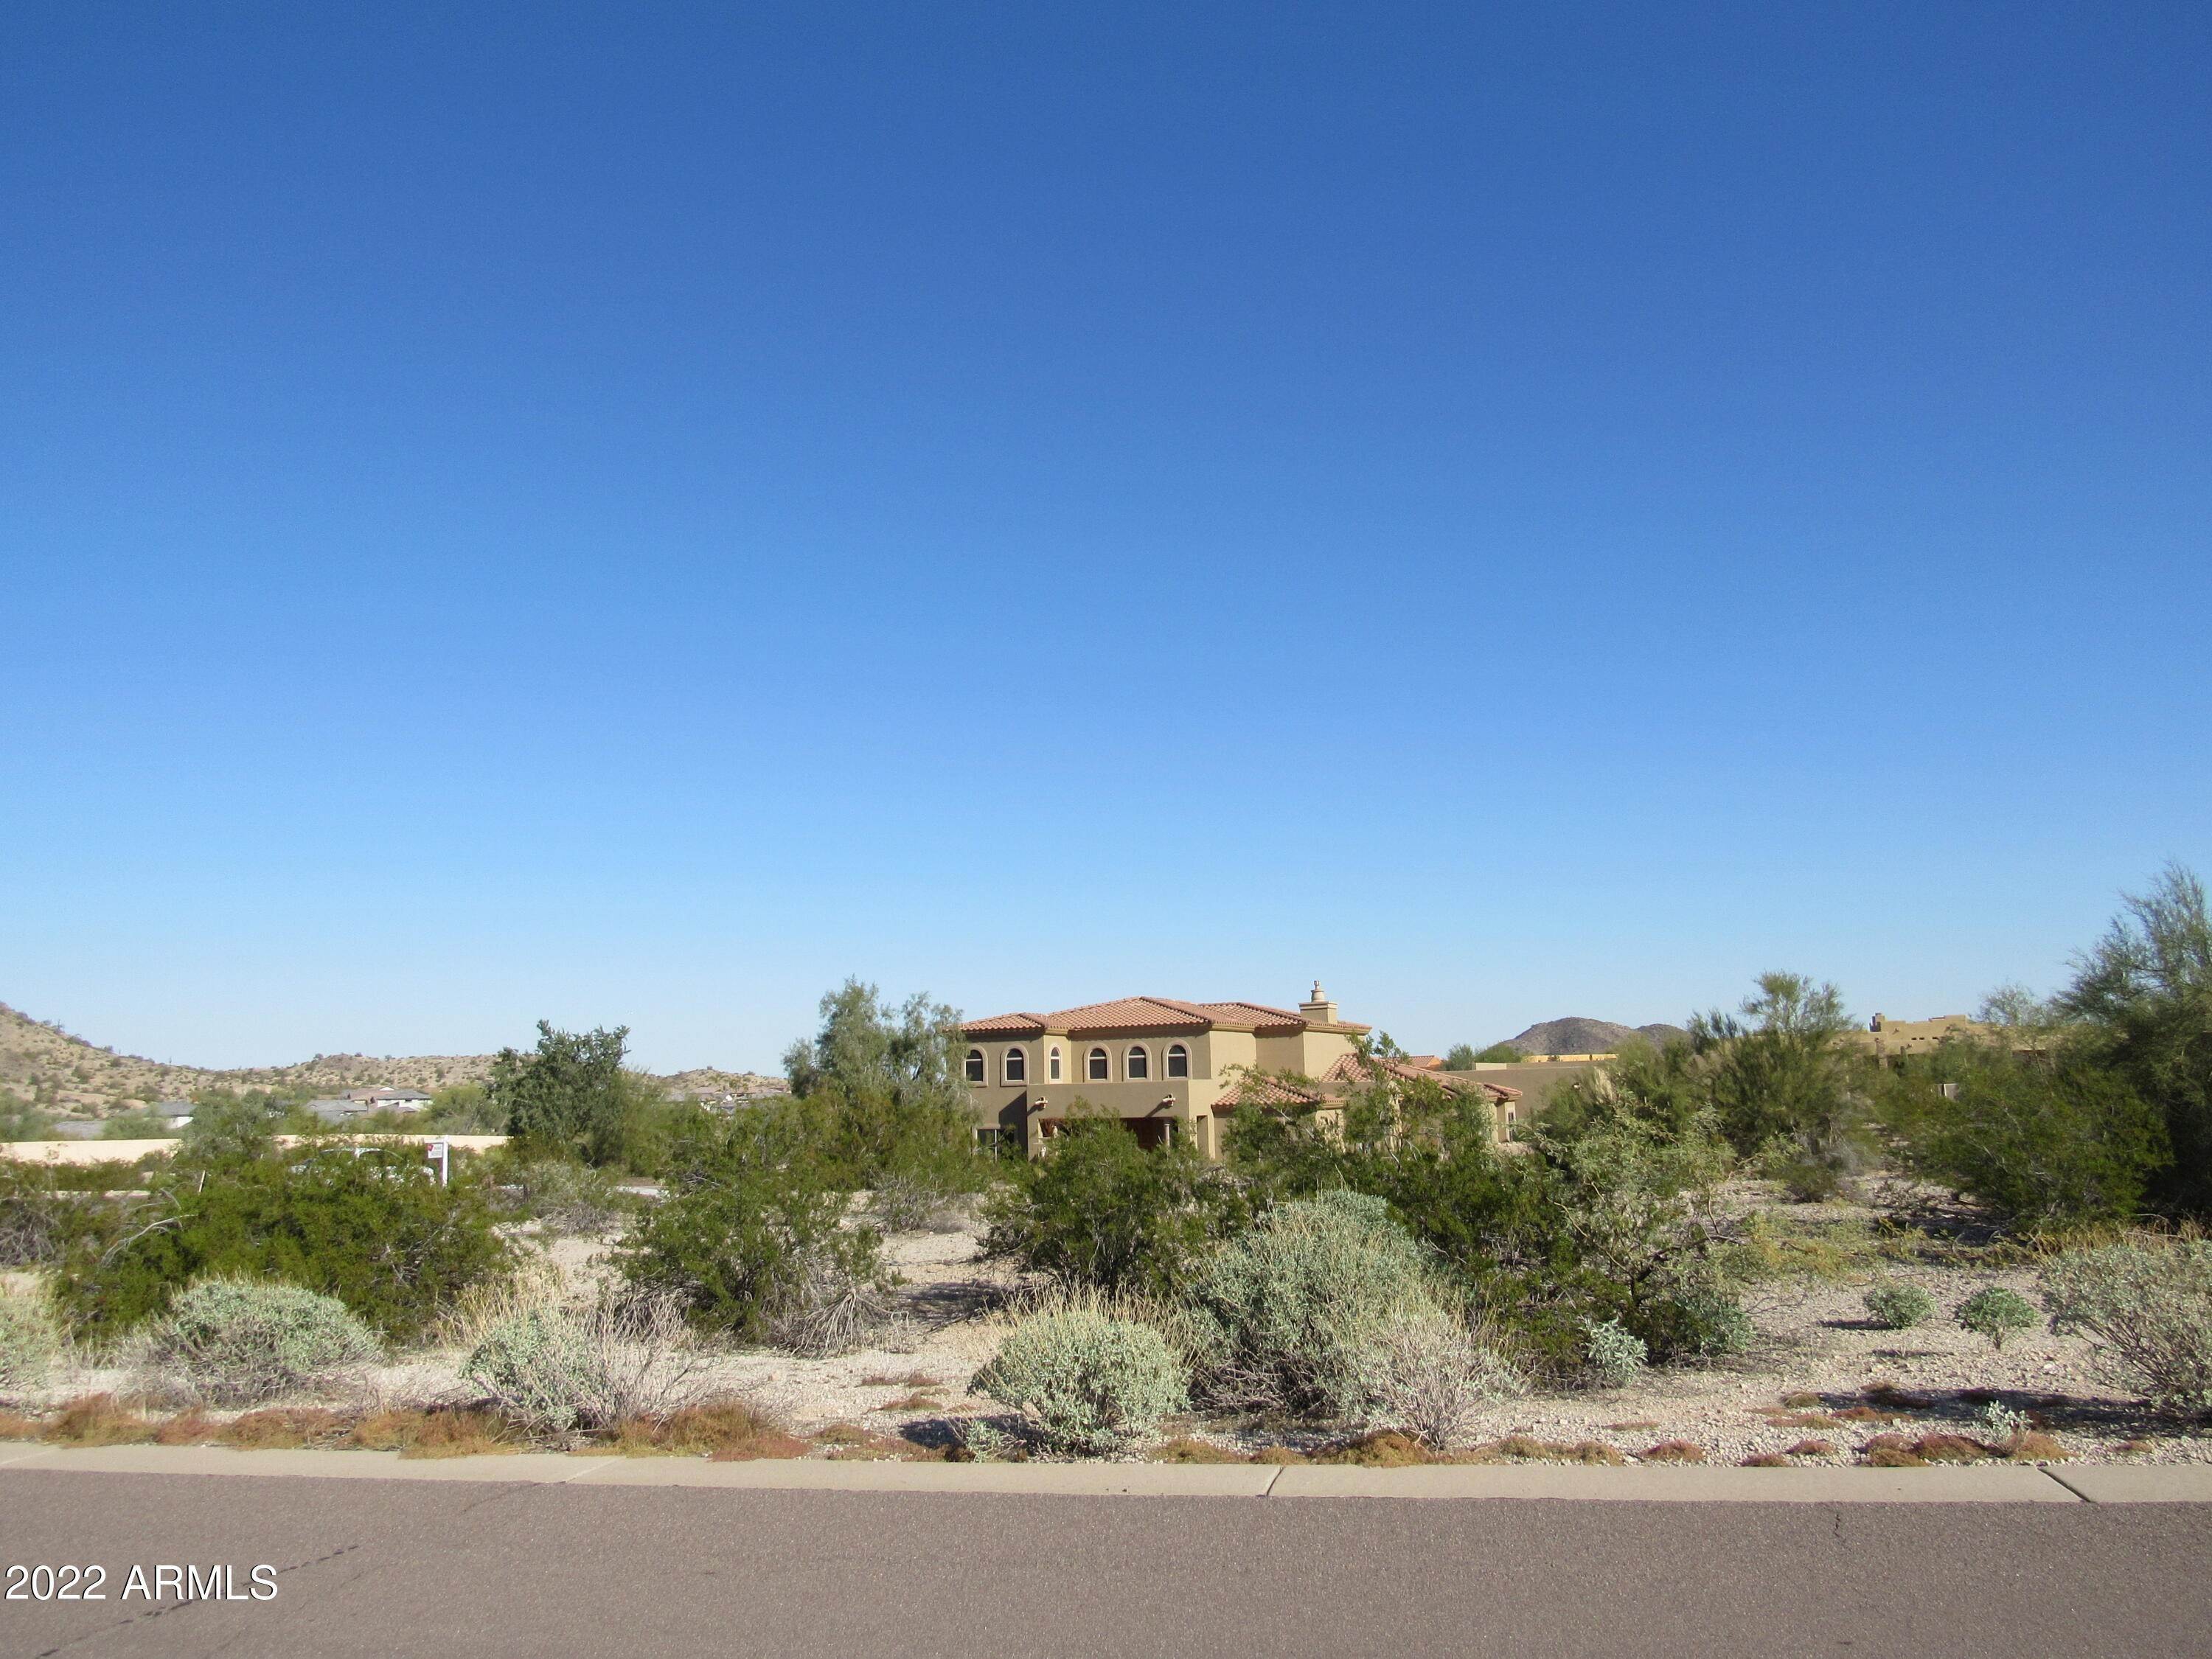 4. Land for Sale at Goodyear, AZ 85338